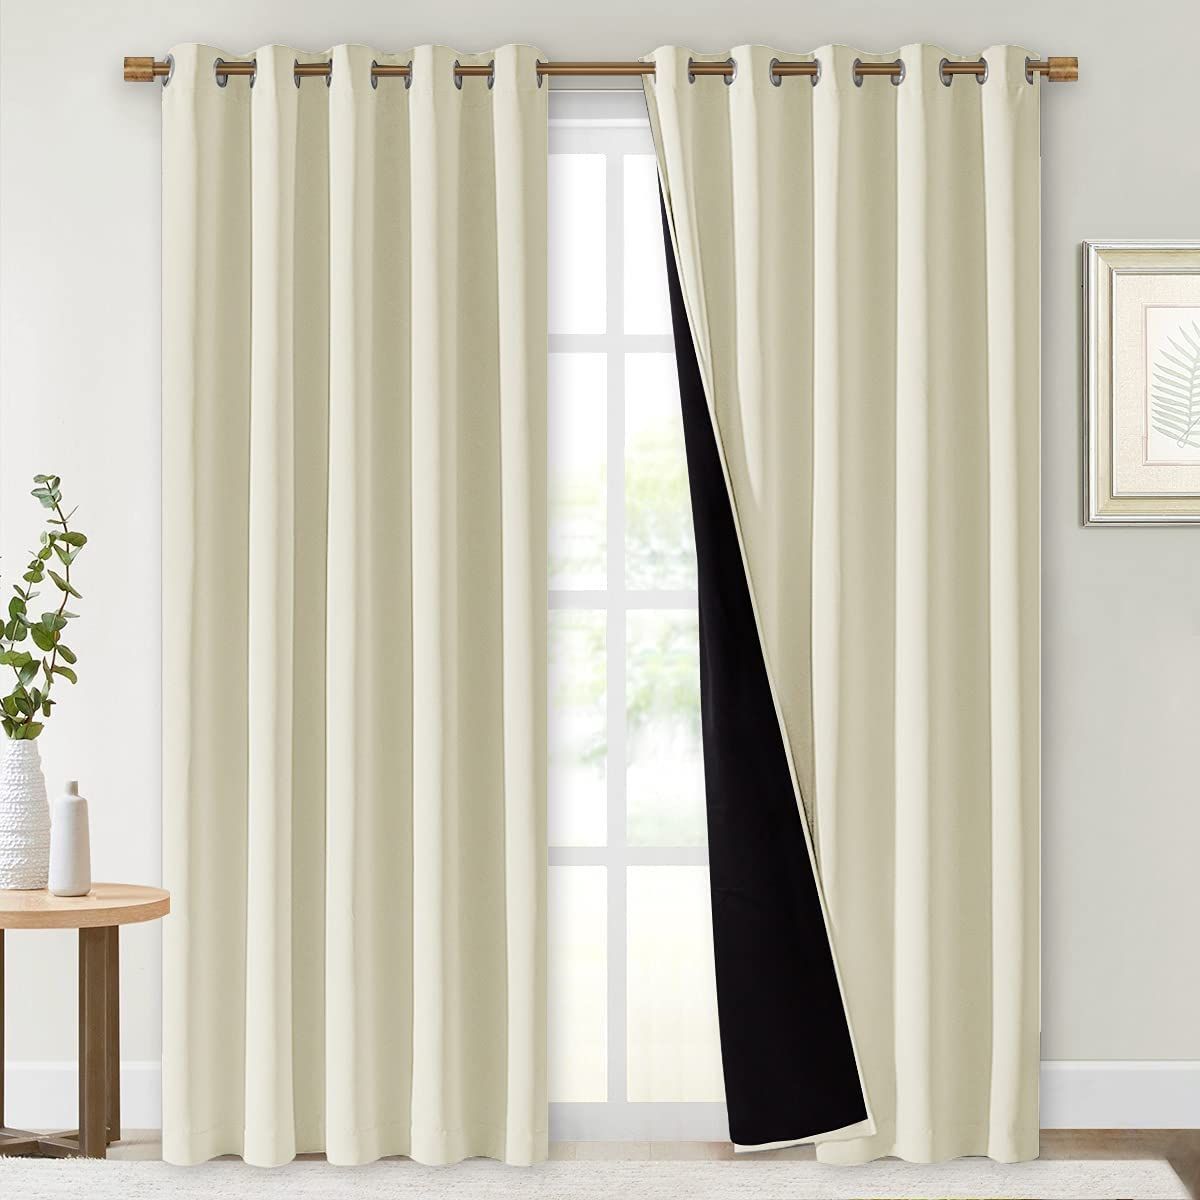 Ring Top Thermal Insulated Blackout Window Short Curtain For Bedroom Kitchen US 